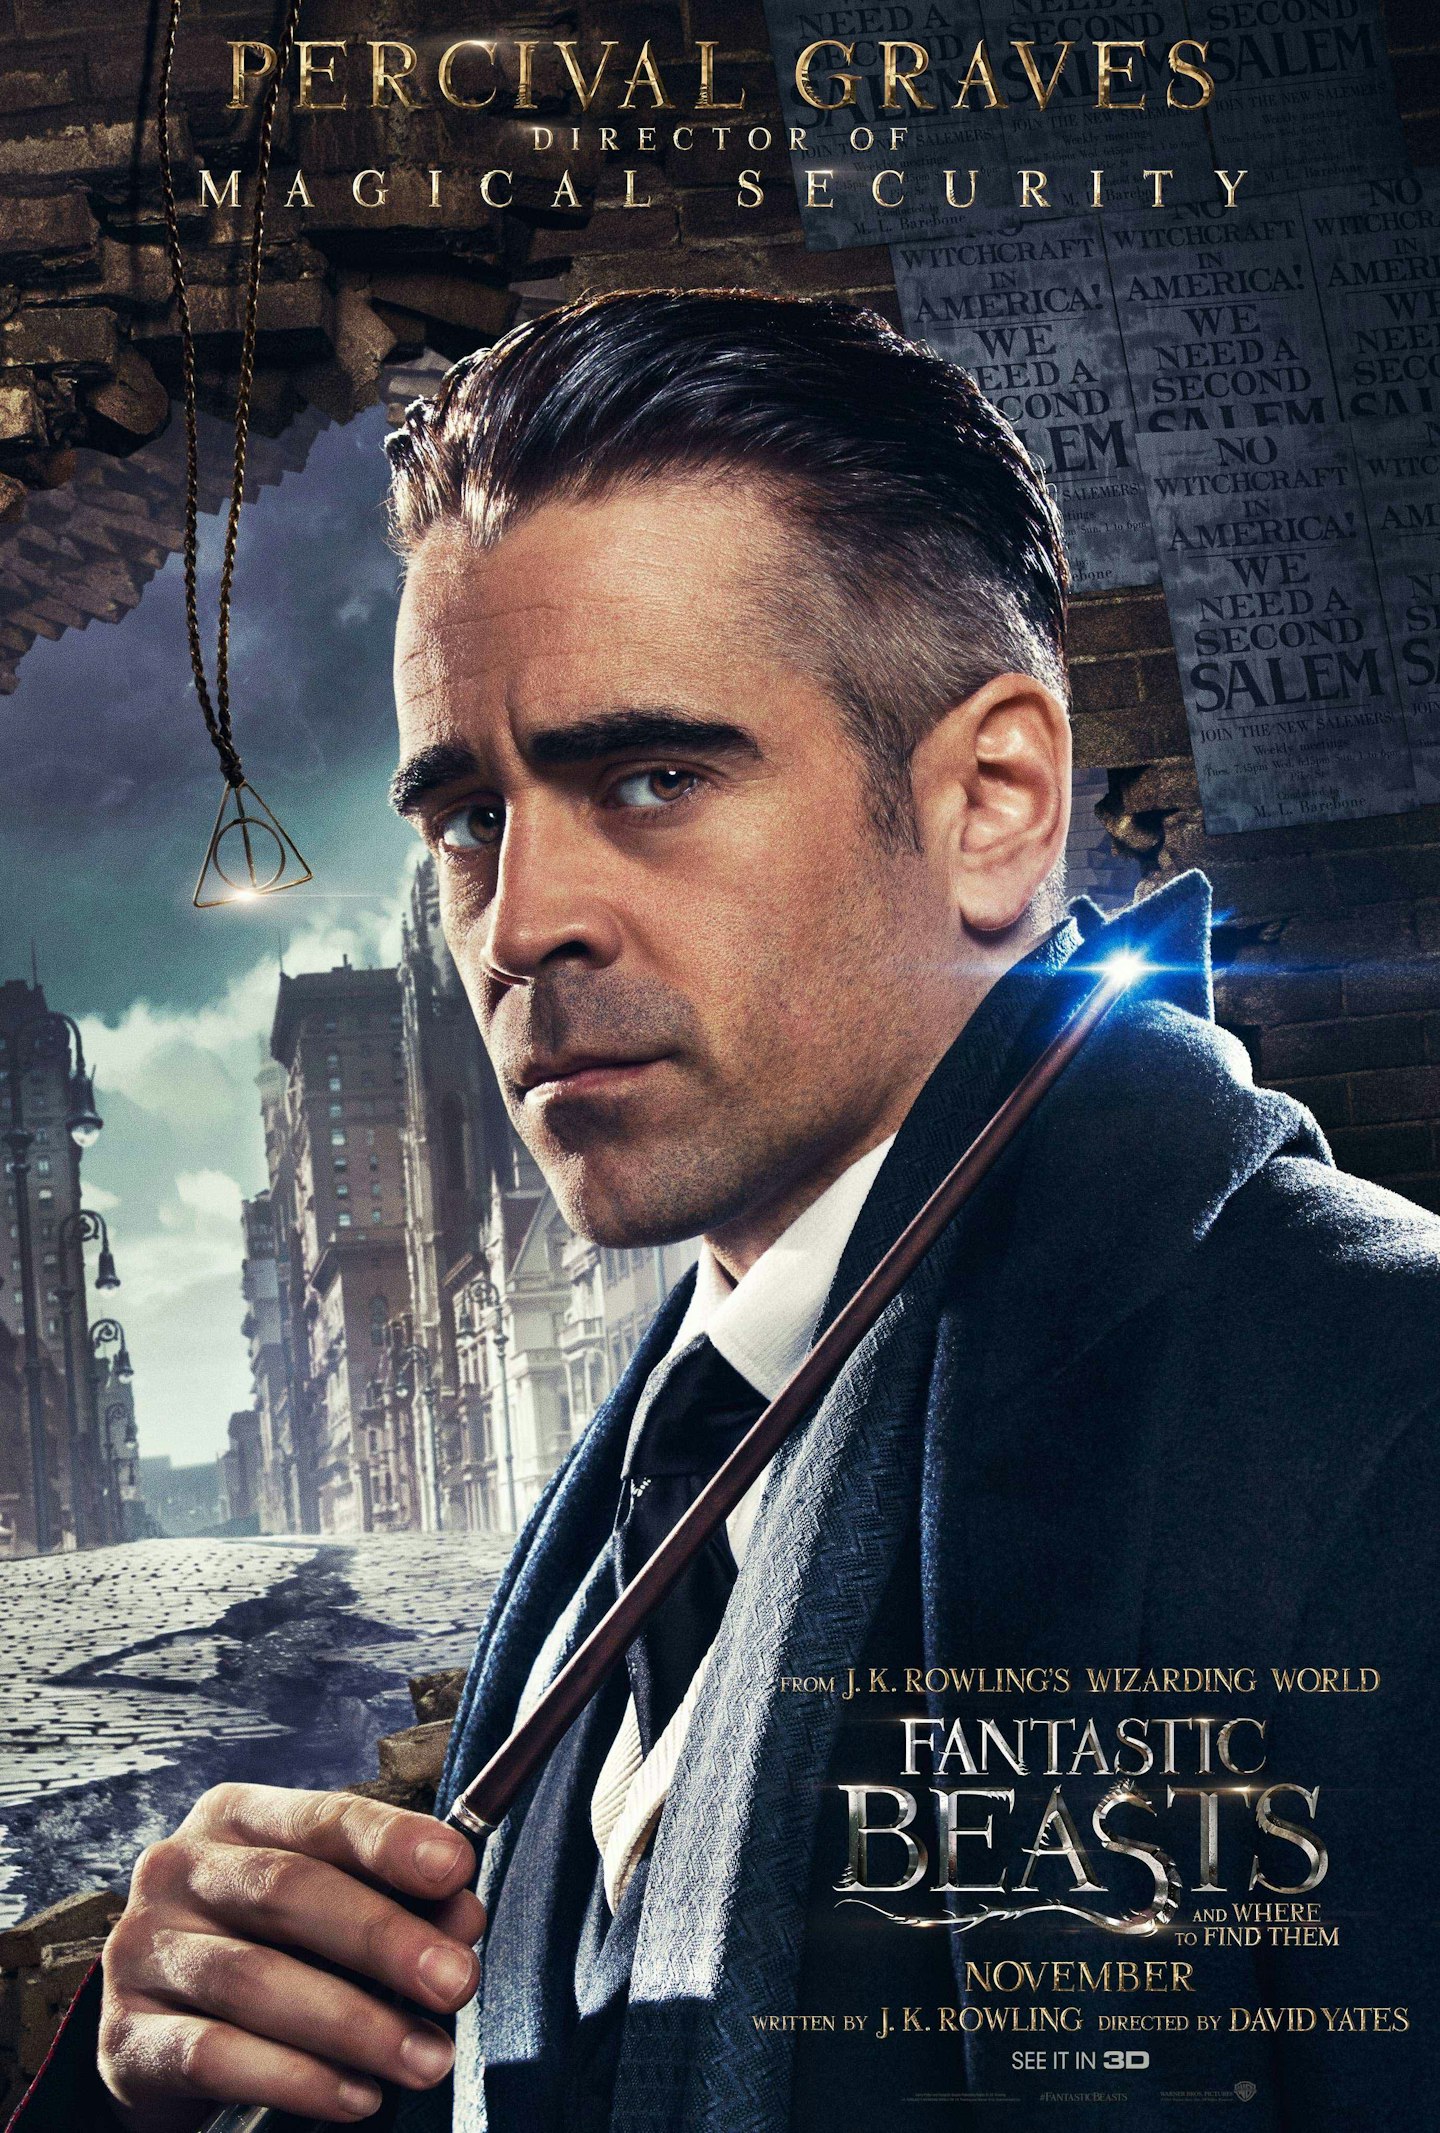 Fantastic Beasts And Where To Find Them character posters